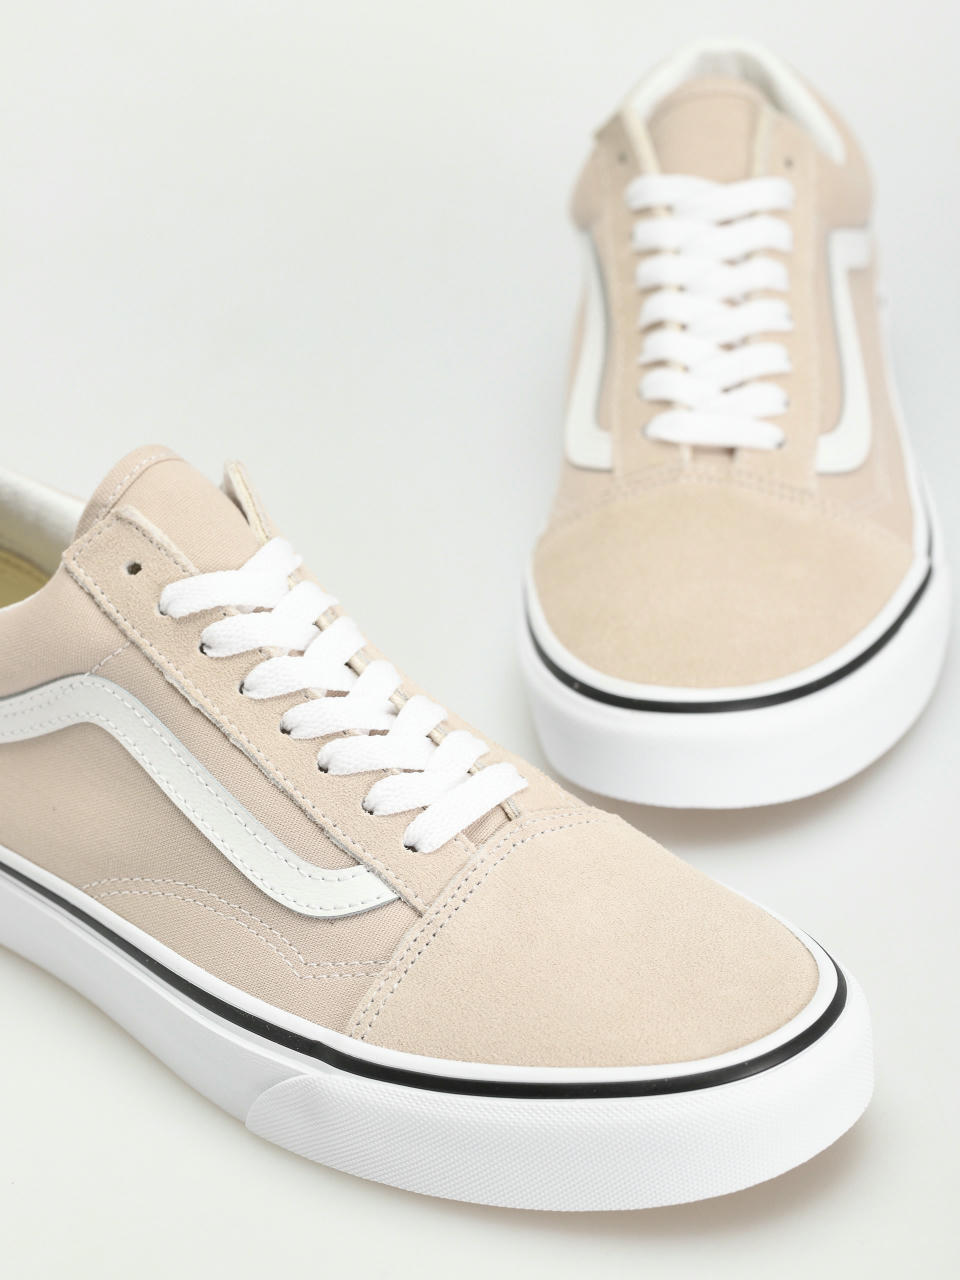 Vans Old Skool Shoes (color theory french oak)